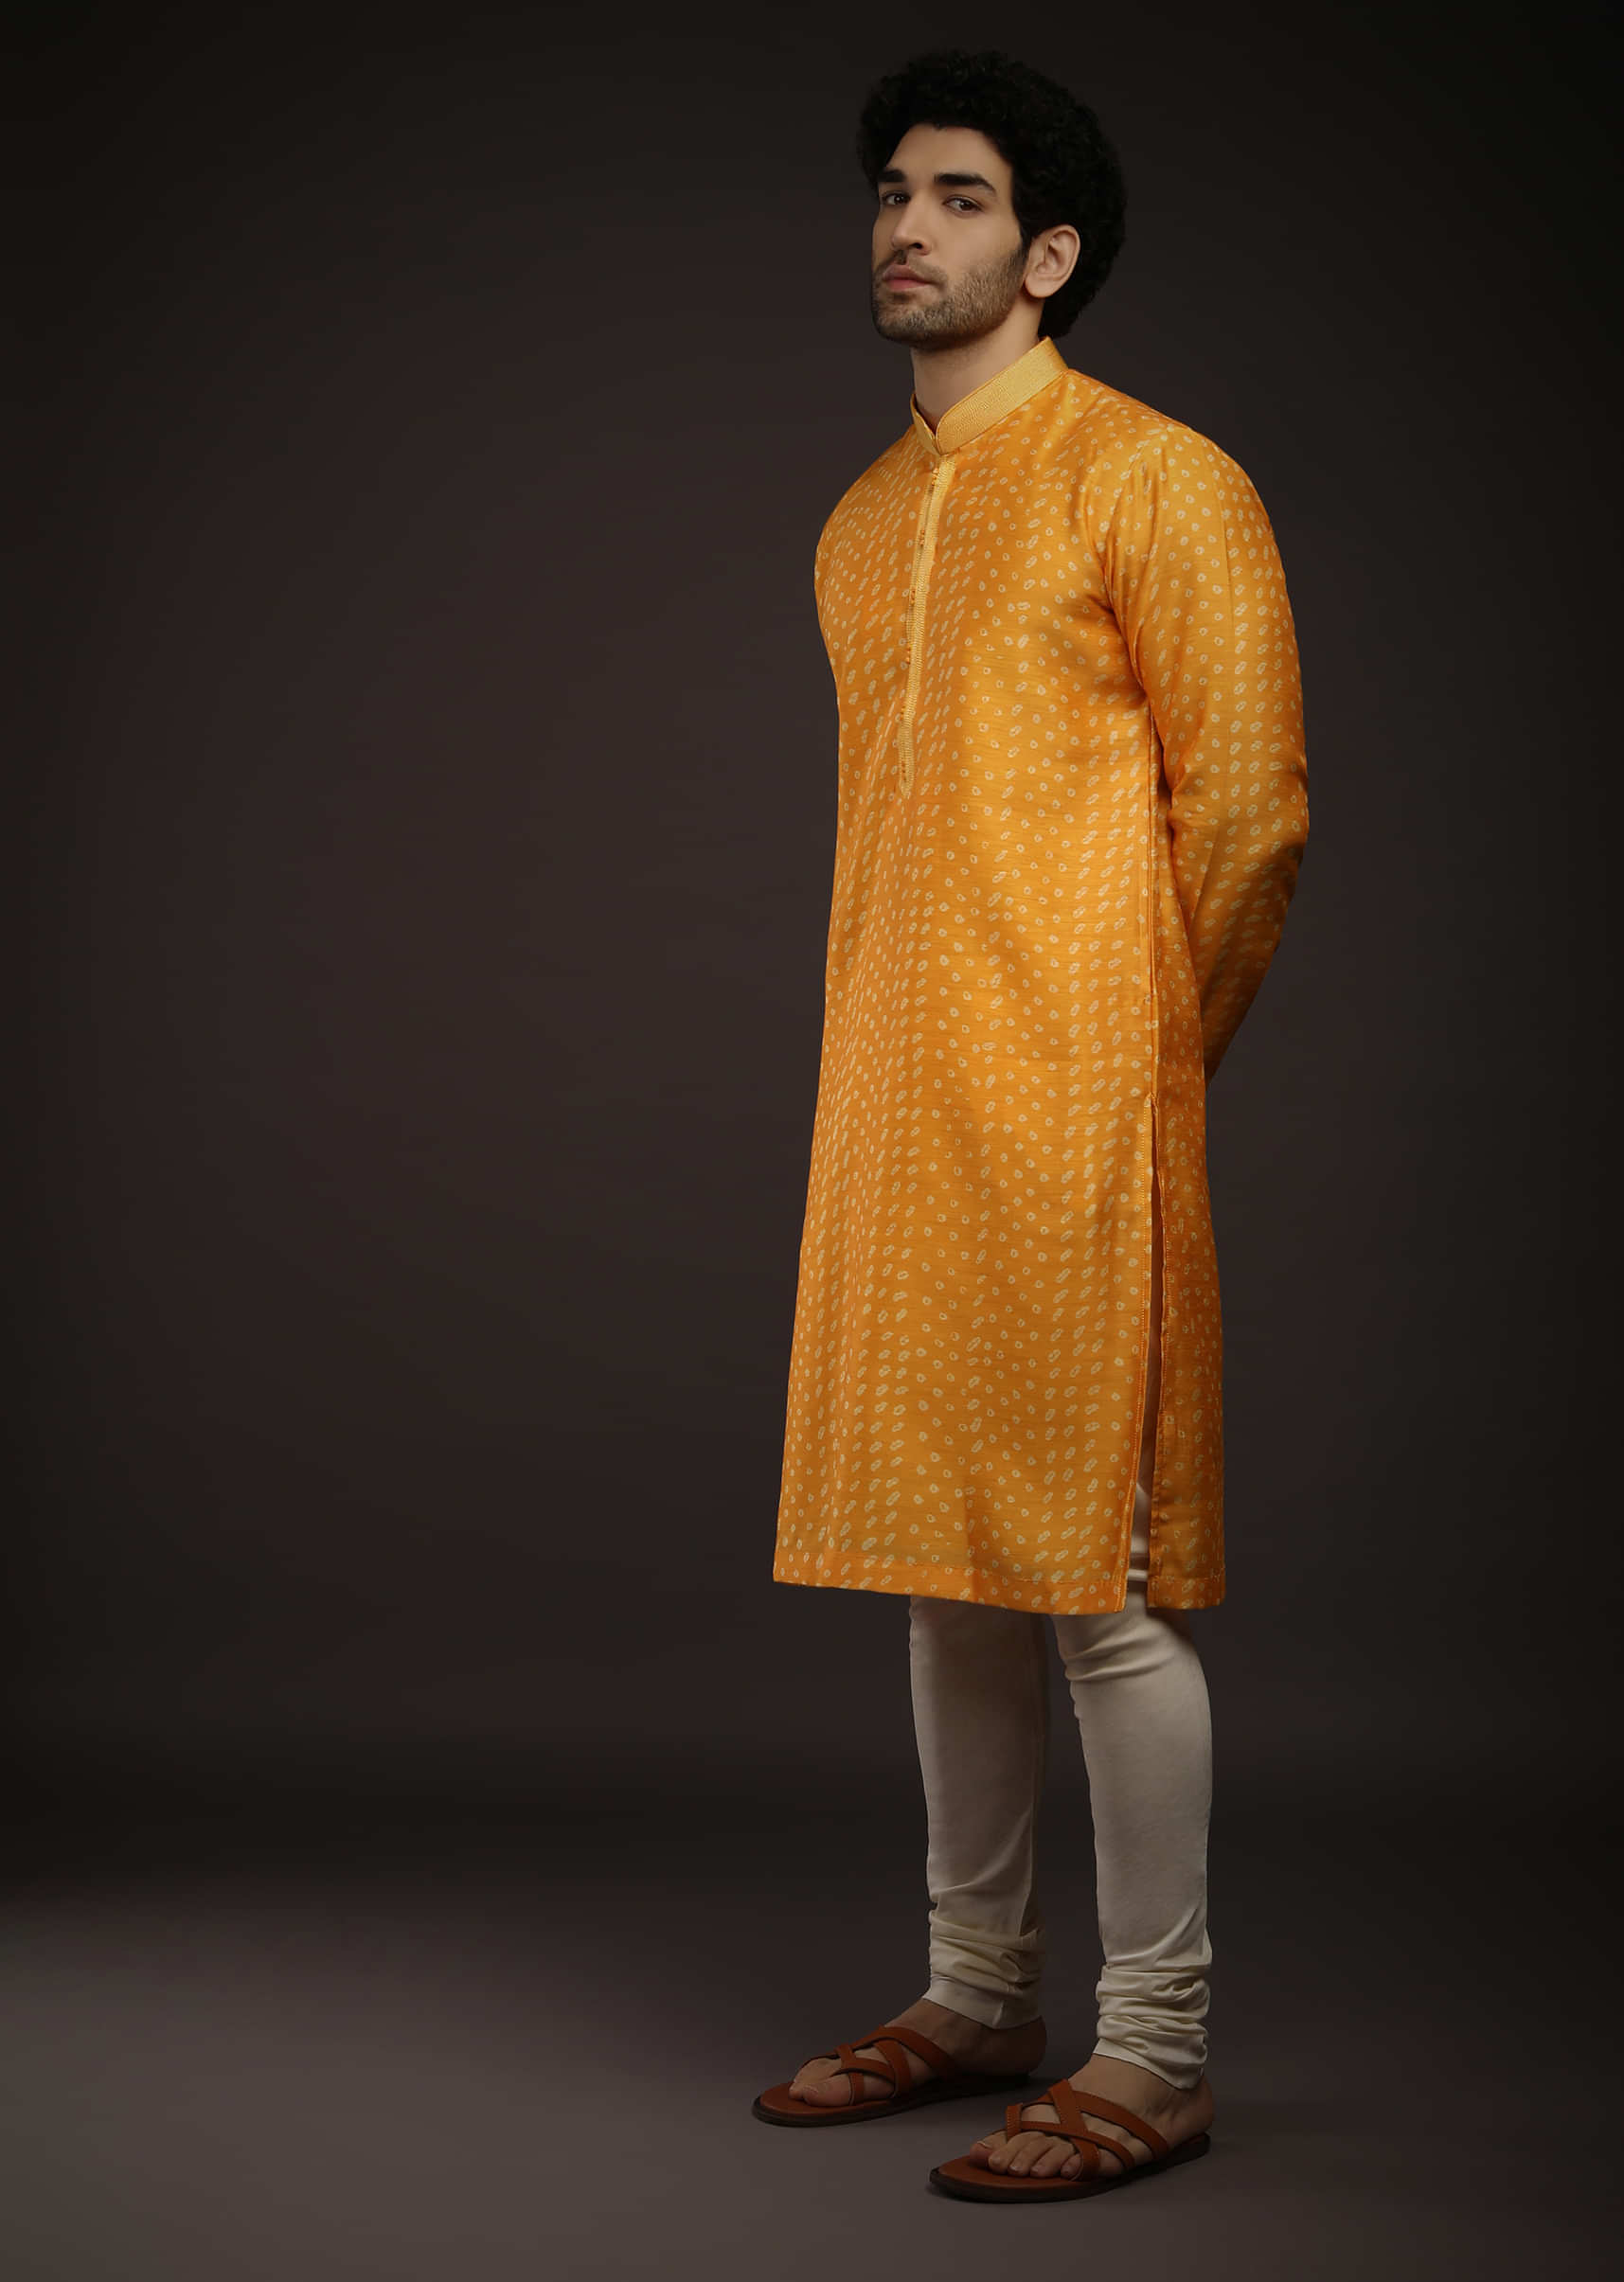 Zinnia Yellow Kurta Set In Raw Silk With Bandhani Design All Over And Resham Work On The Placket